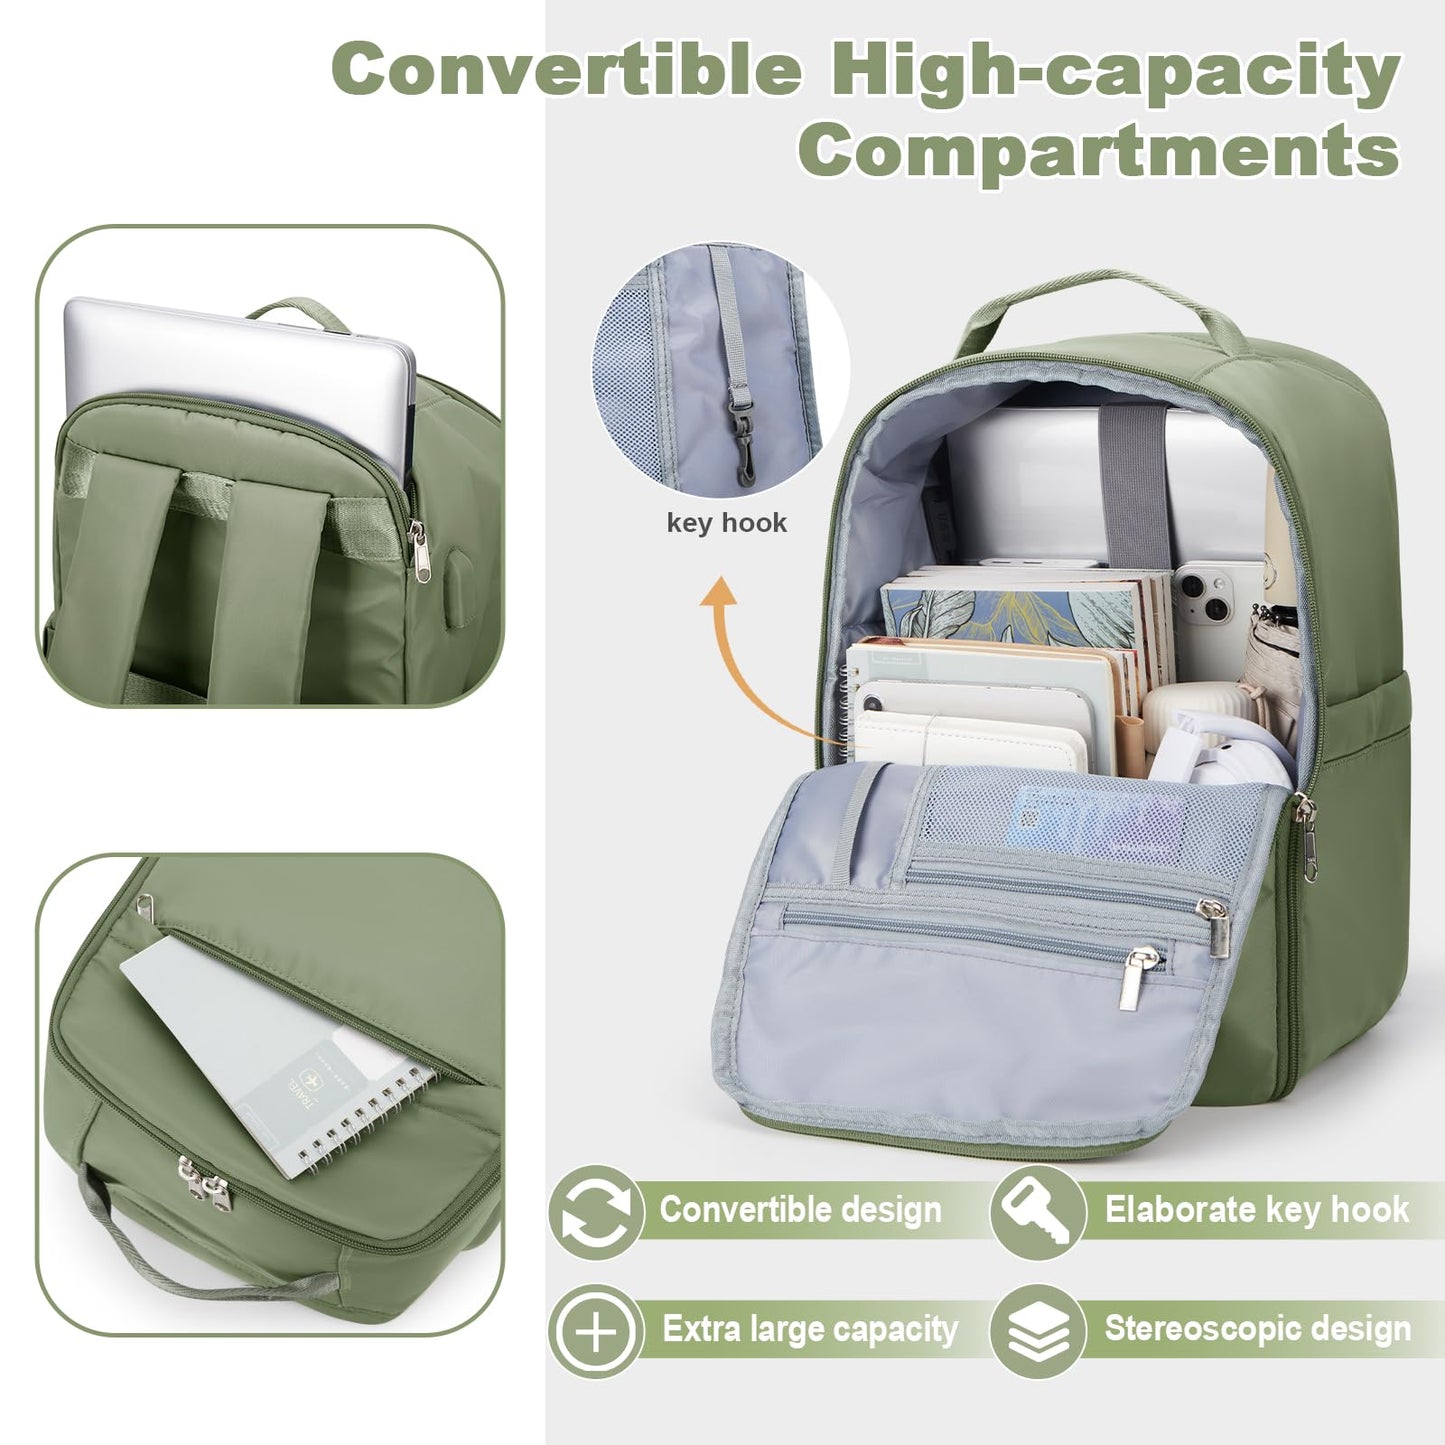 Cabin Bags 40x20x25 for Ryanair Underseat Carry-ons Bag Women, easyjet cabin bag 45x36x20 Hand Luggage Bag Travel Backpack Cabin Size Laptop backpack with USB Charging Port Shoes Compartment